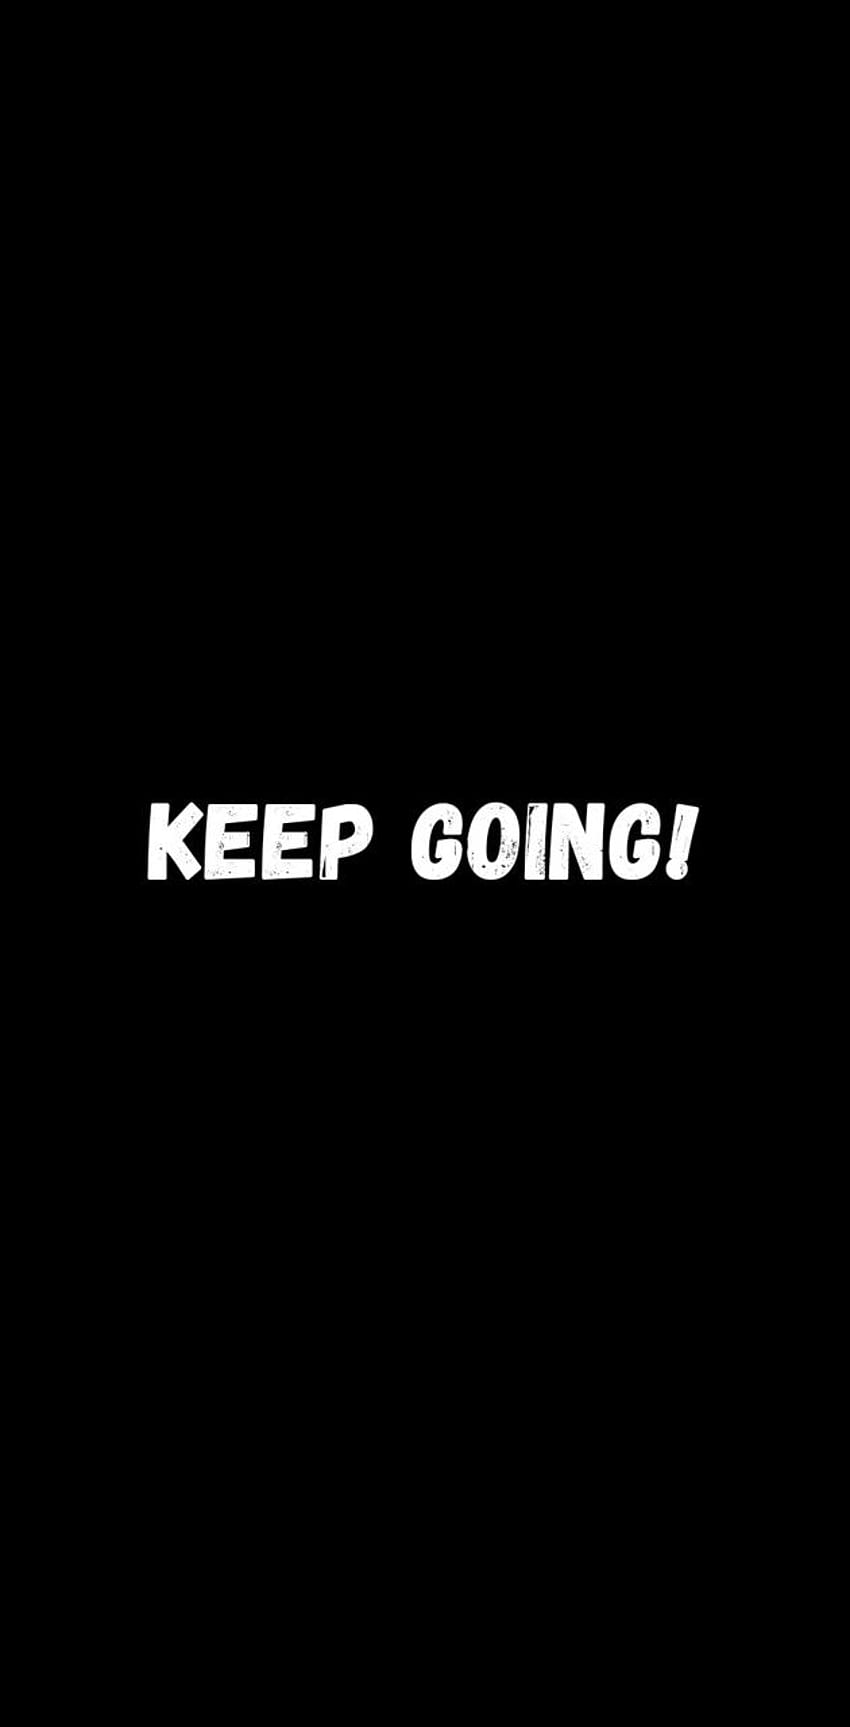 Keep Going by NOGHS - ZEDGE™ で、Keep Going iPhone HD電話の壁紙